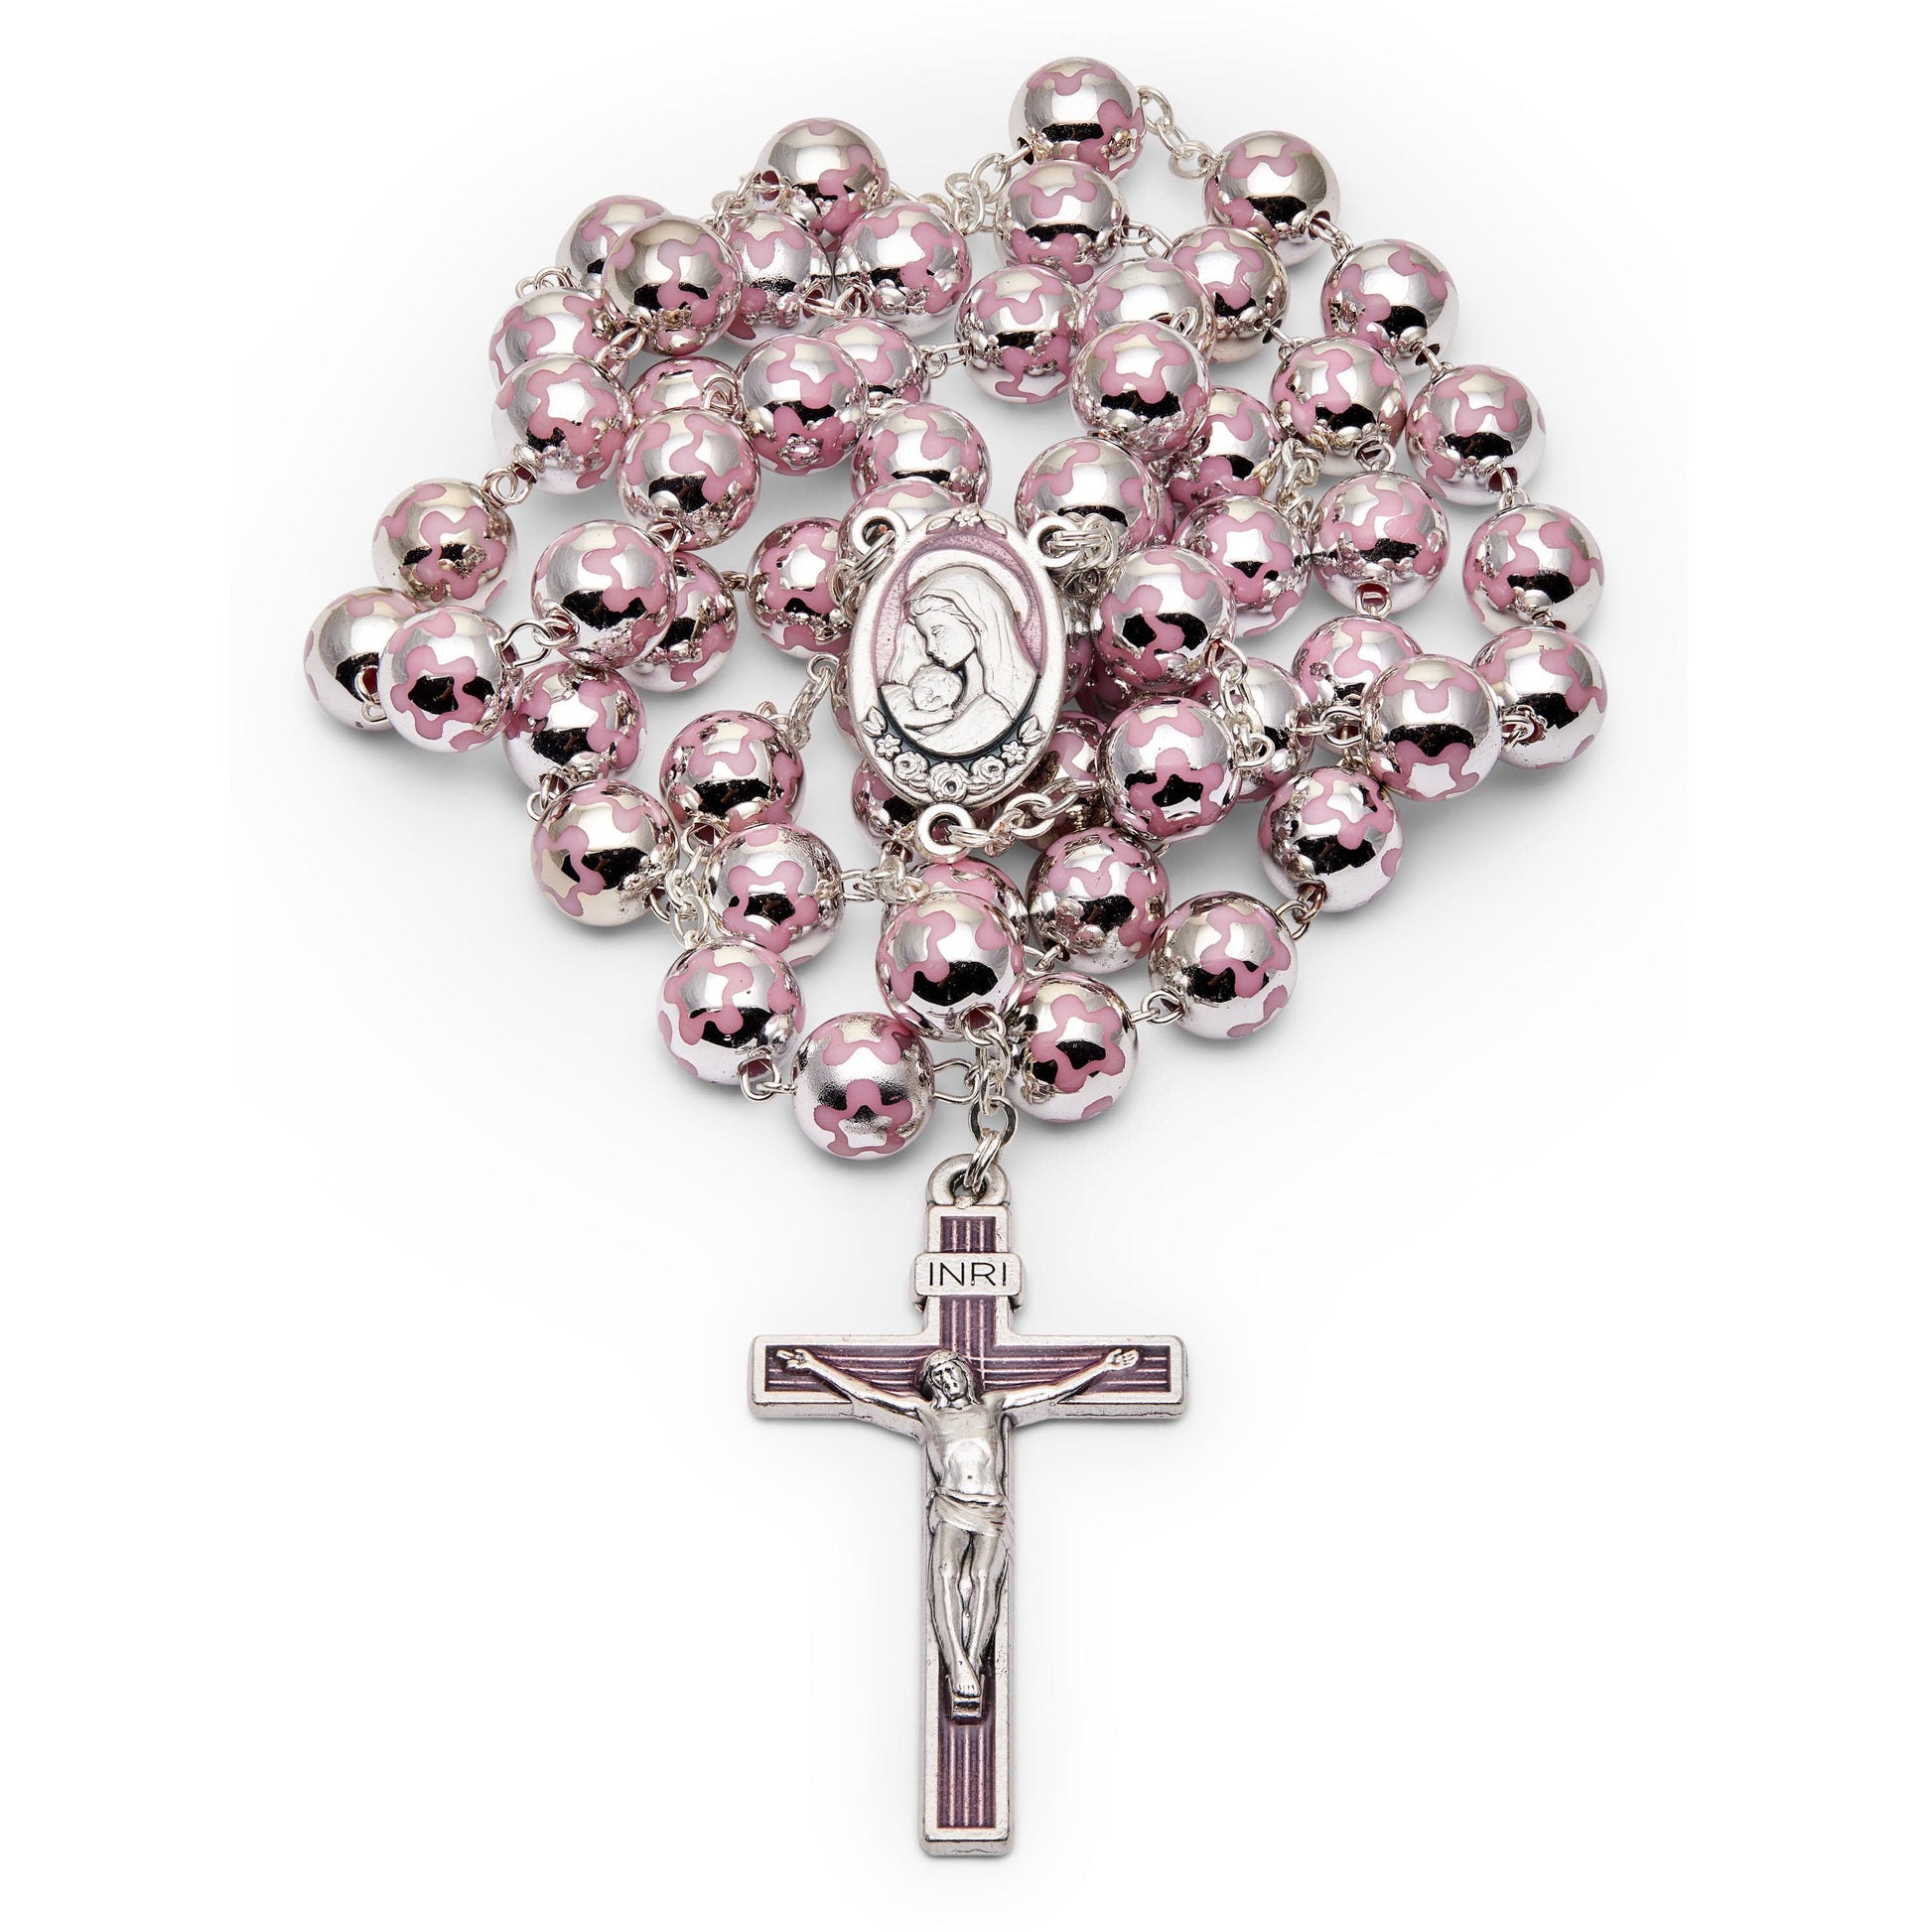 MONDO CATTOLICO Prayer Beads 58 cm (22.83 in) / 10 mm (0.39 in) Sacred Heart of Jesus Rosary in Silver Color Beads decorated with Pink Flowers